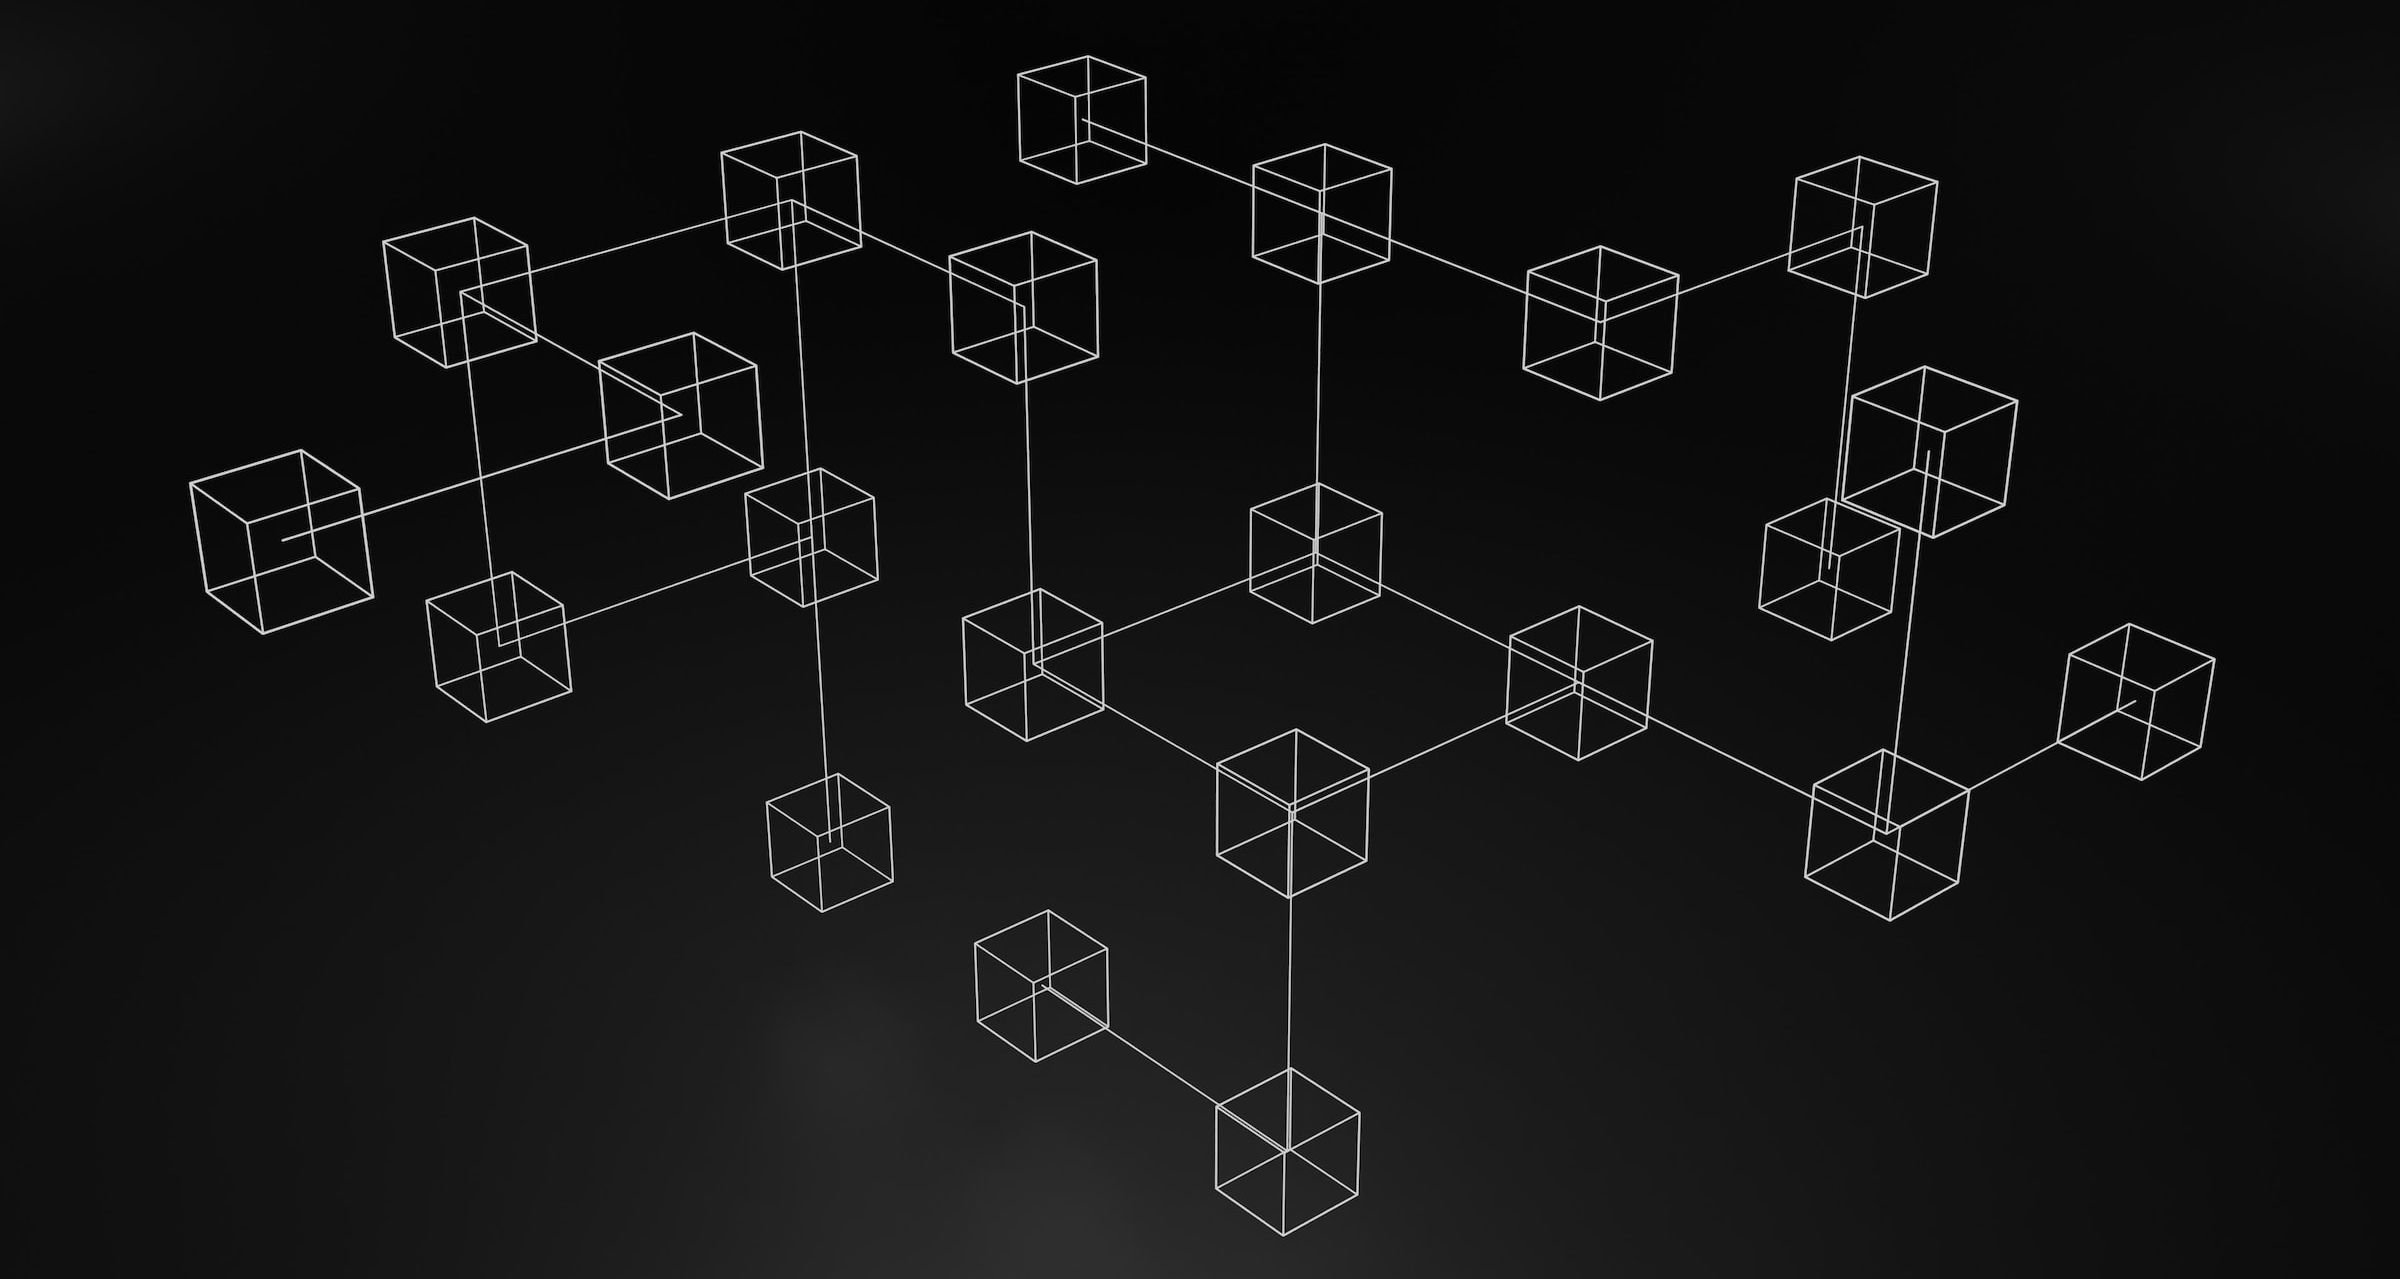 digital graphic of decentralized cube network